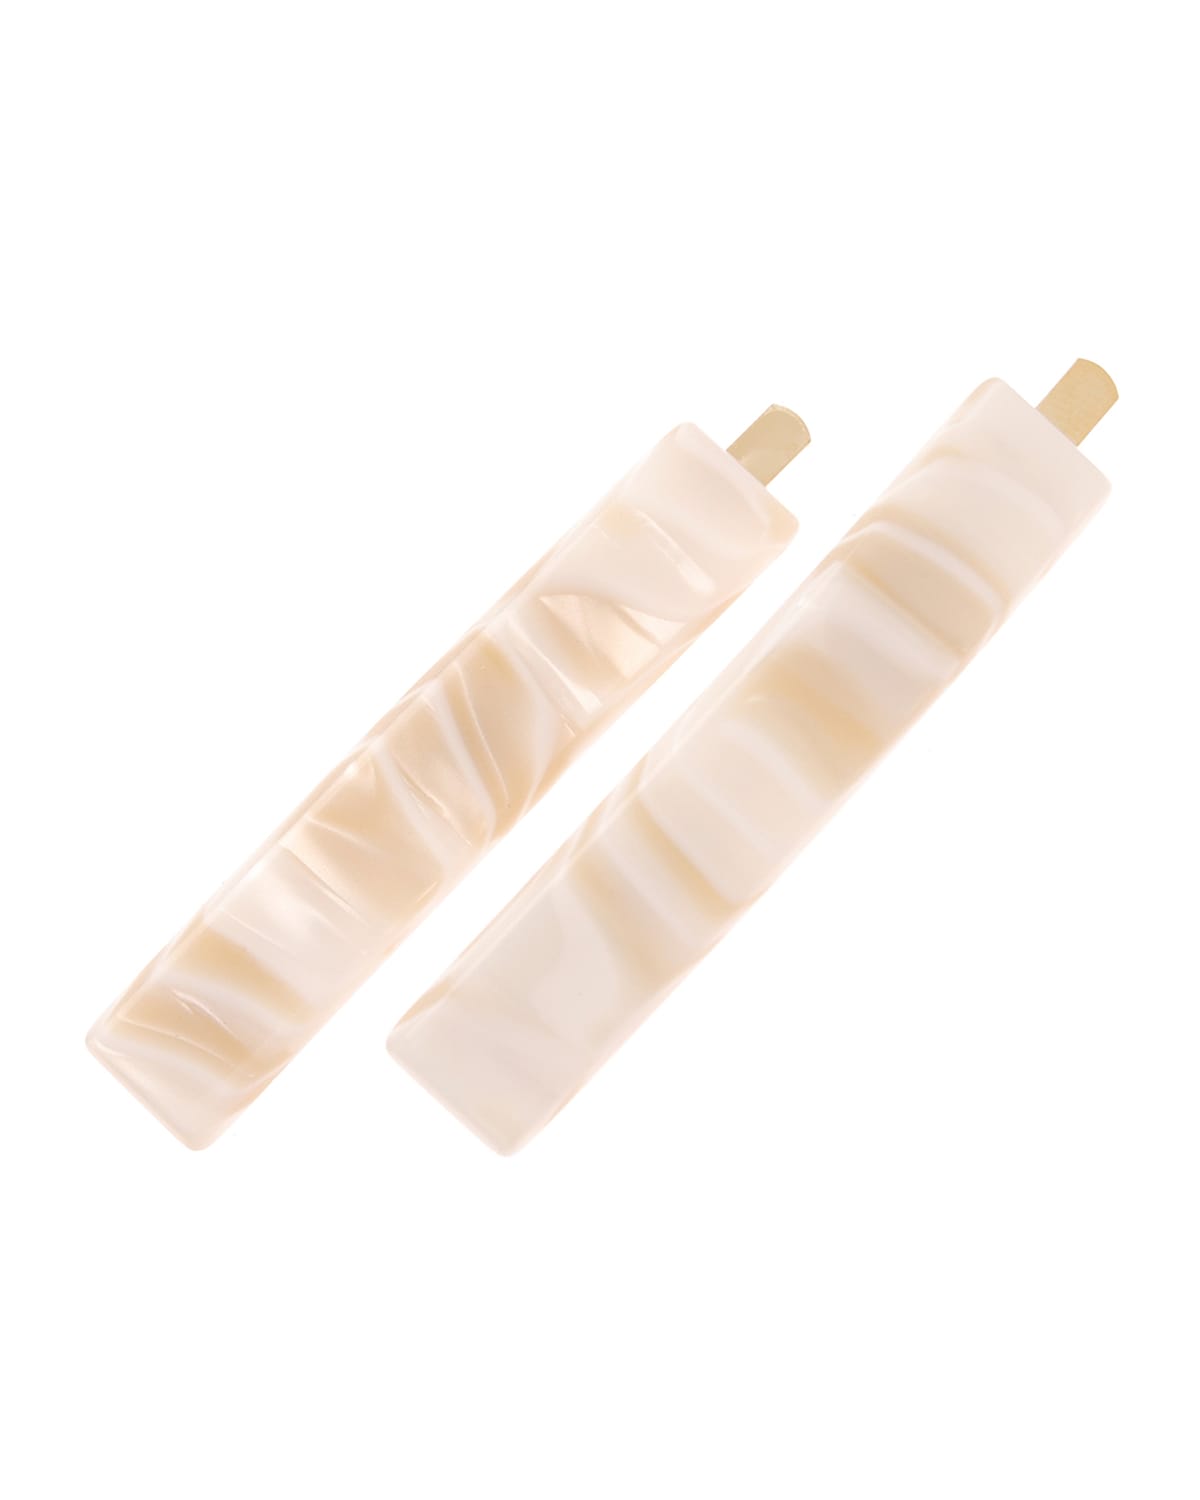 France Luxe Mod Bobby Pin Pair - Classic In Alba